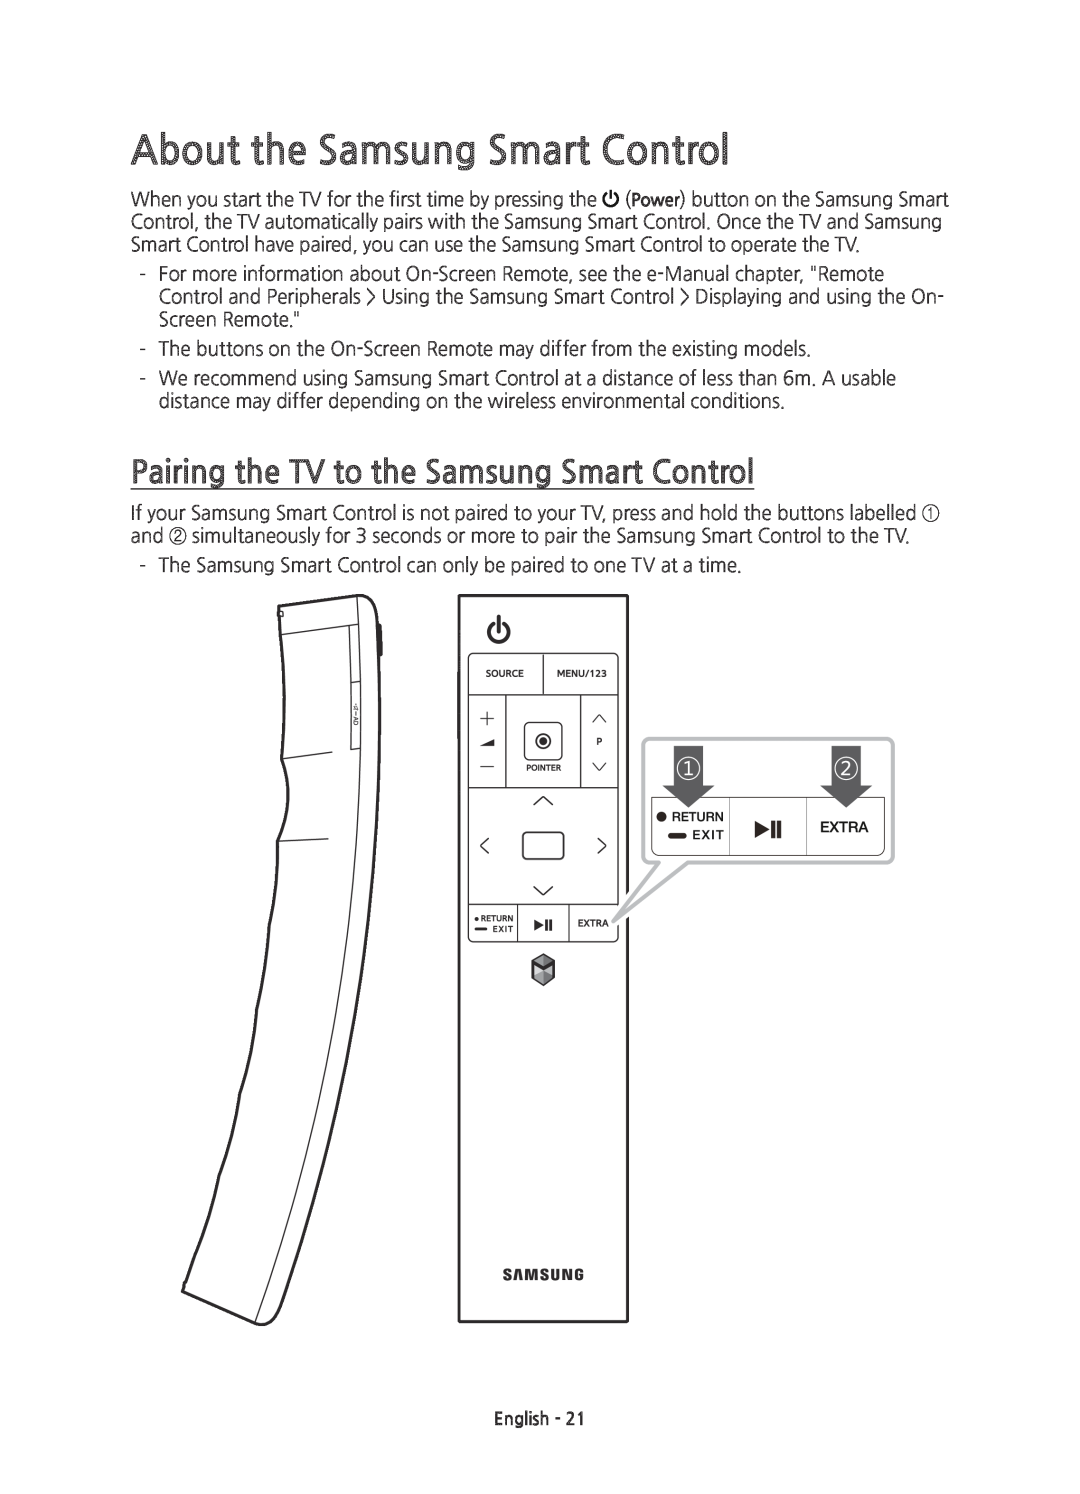 Samsung UE78JS9500TXXU, UE88JS9500TXZF manual About the Samsung Smart Control, Pairing the TV to the Samsung Smart Control 